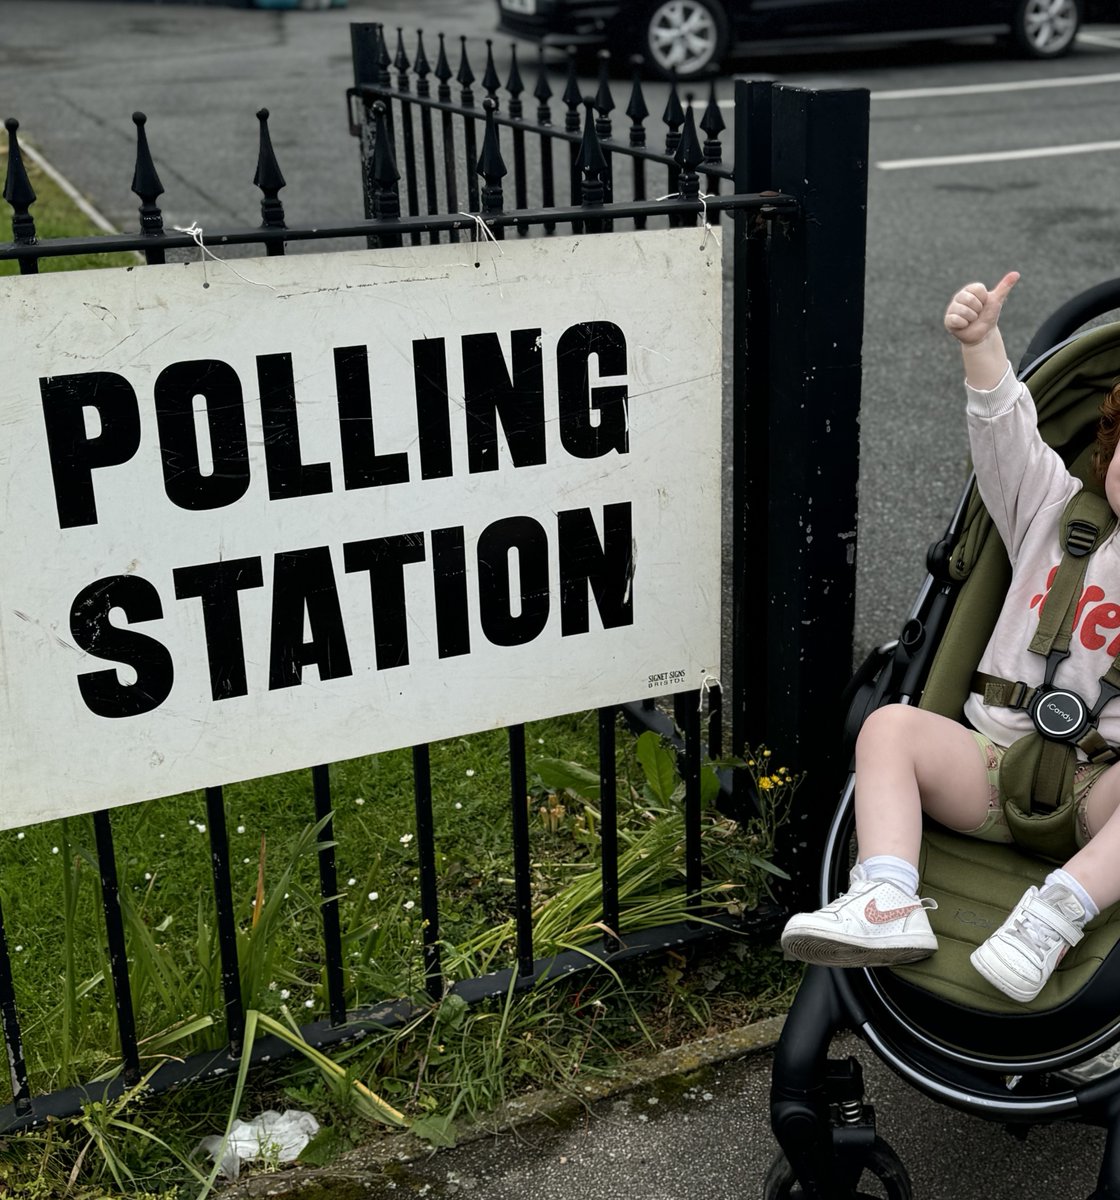 Don't forget, polling stations are open until 10pm so there's still time to cast your vote for a new Police, Fire and Crime Commissioner for Essex. You will need to show photo ID - you can use expired ID as long as it still looks like you.